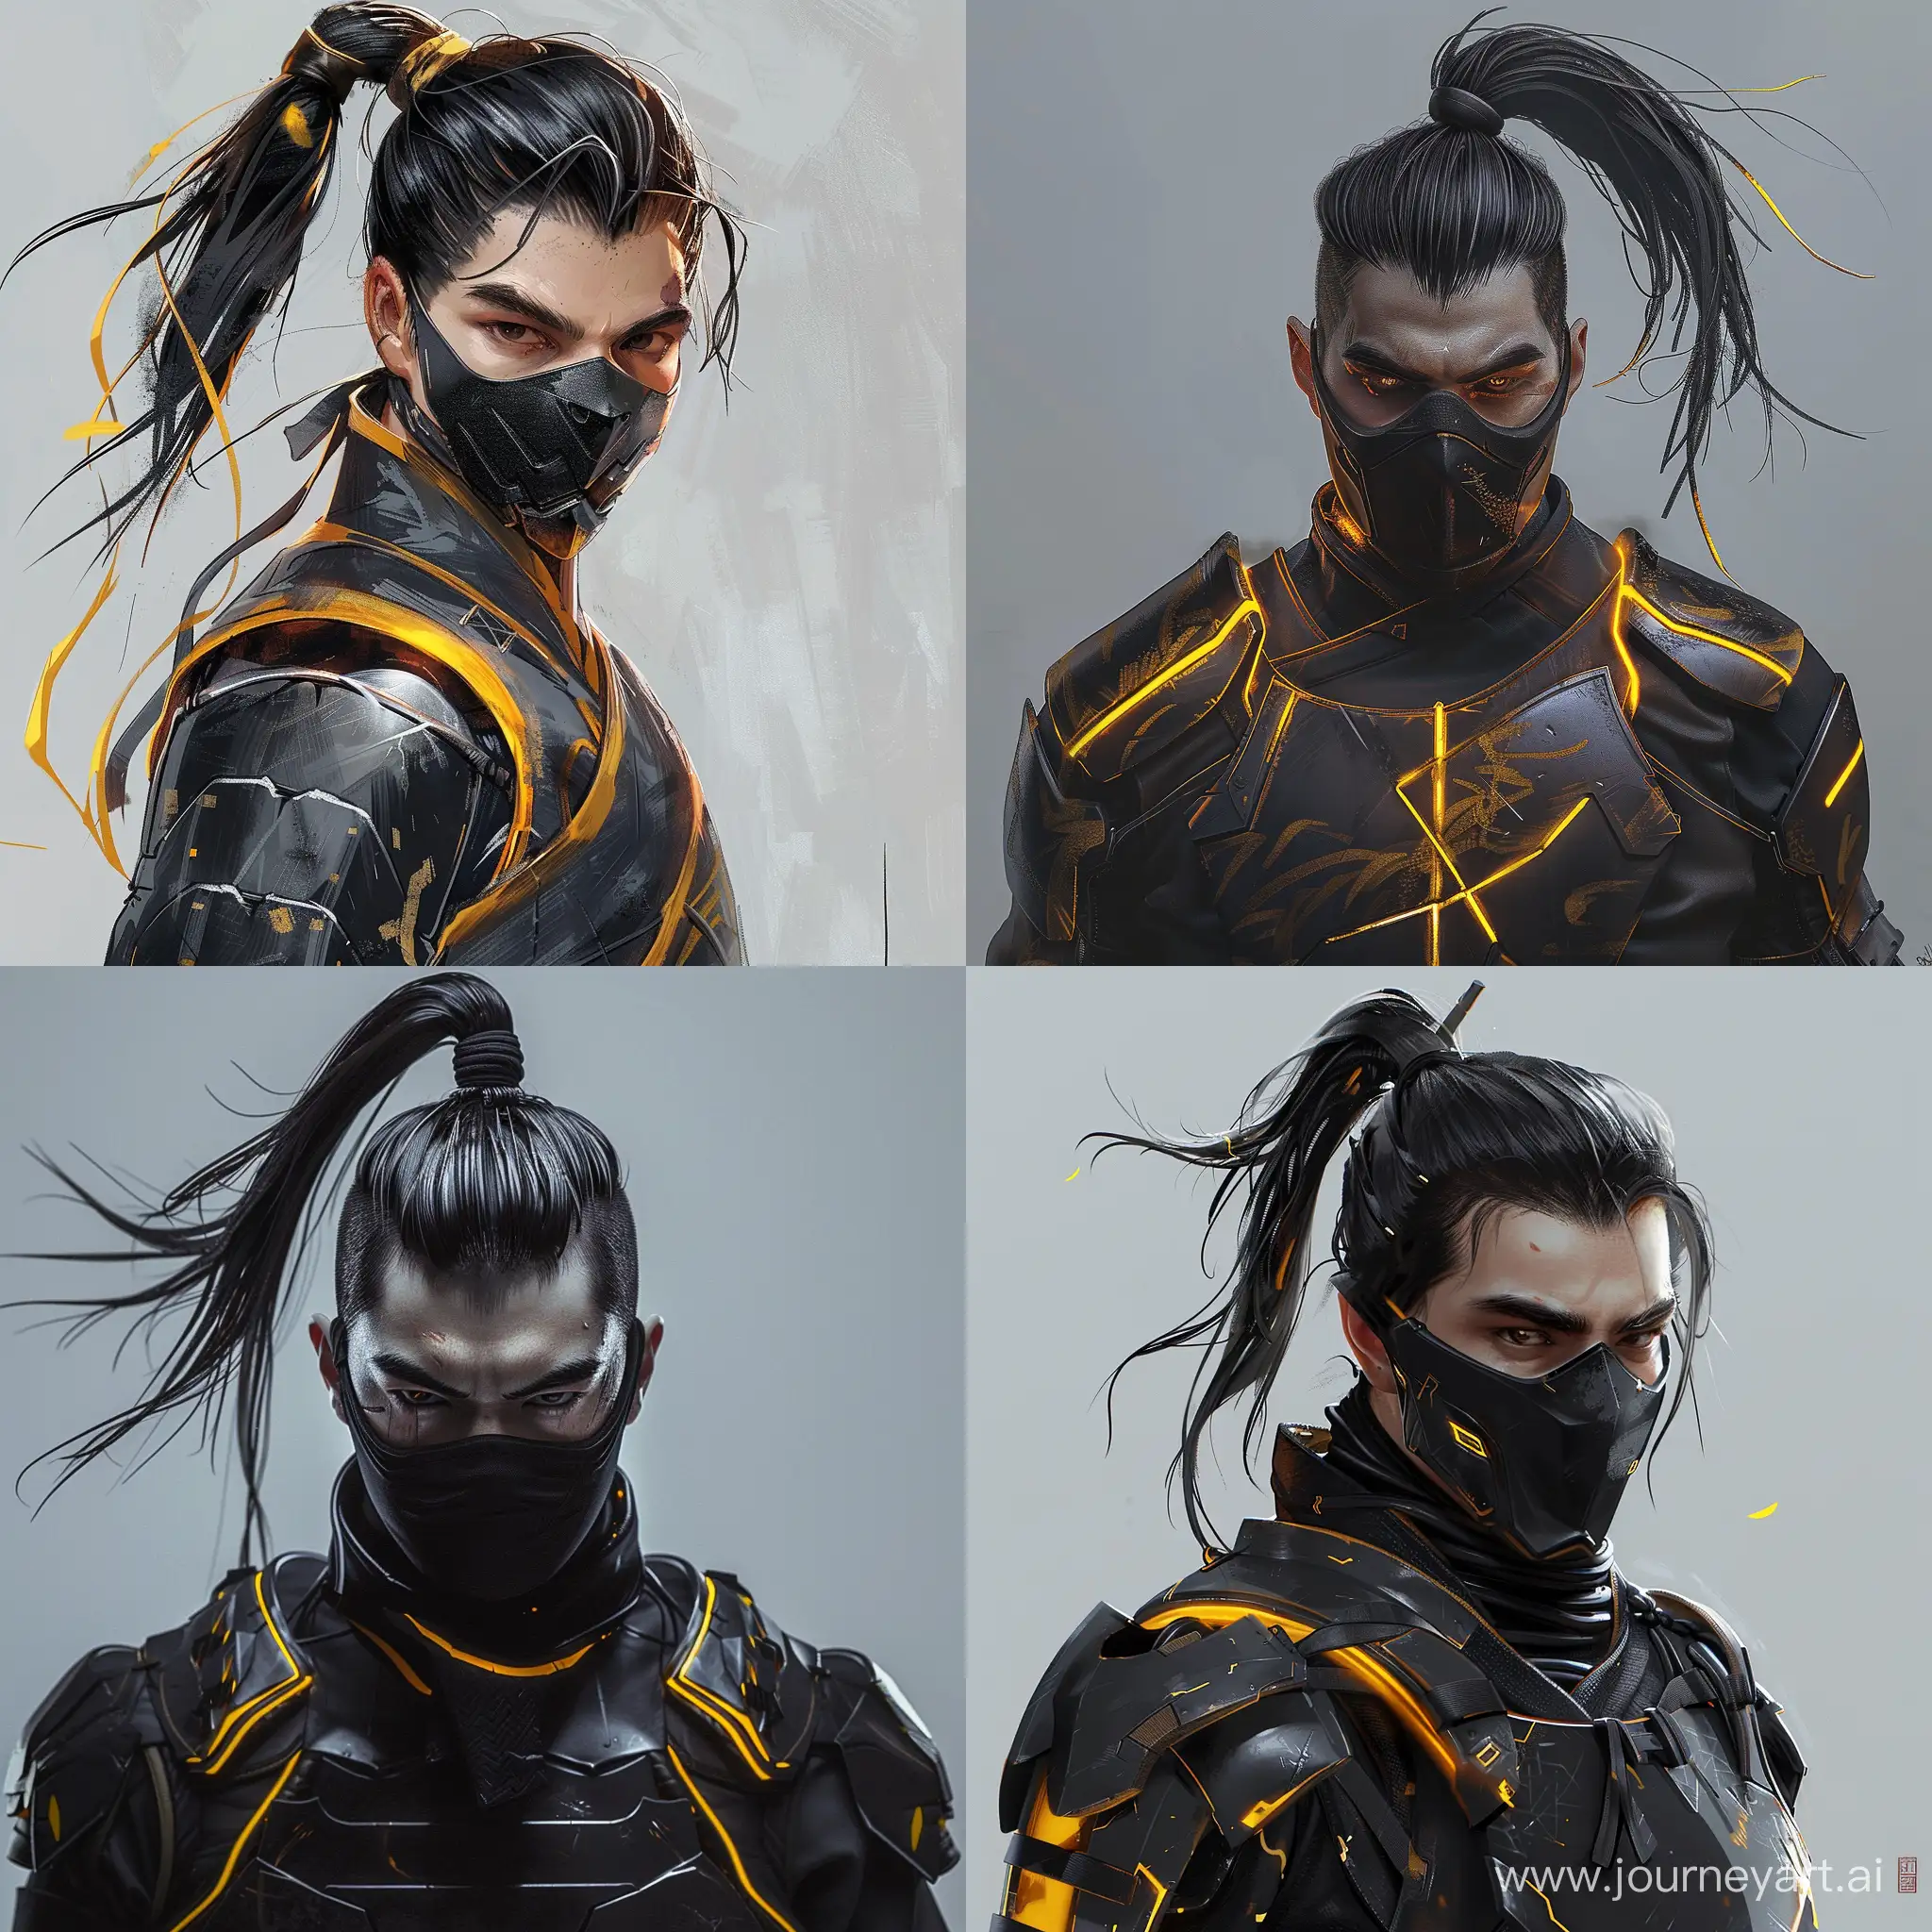 Ninja-Warrior-with-Black-Ponytail-Hair-and-Masked-Face-in-Yellow-and-Black-Armor